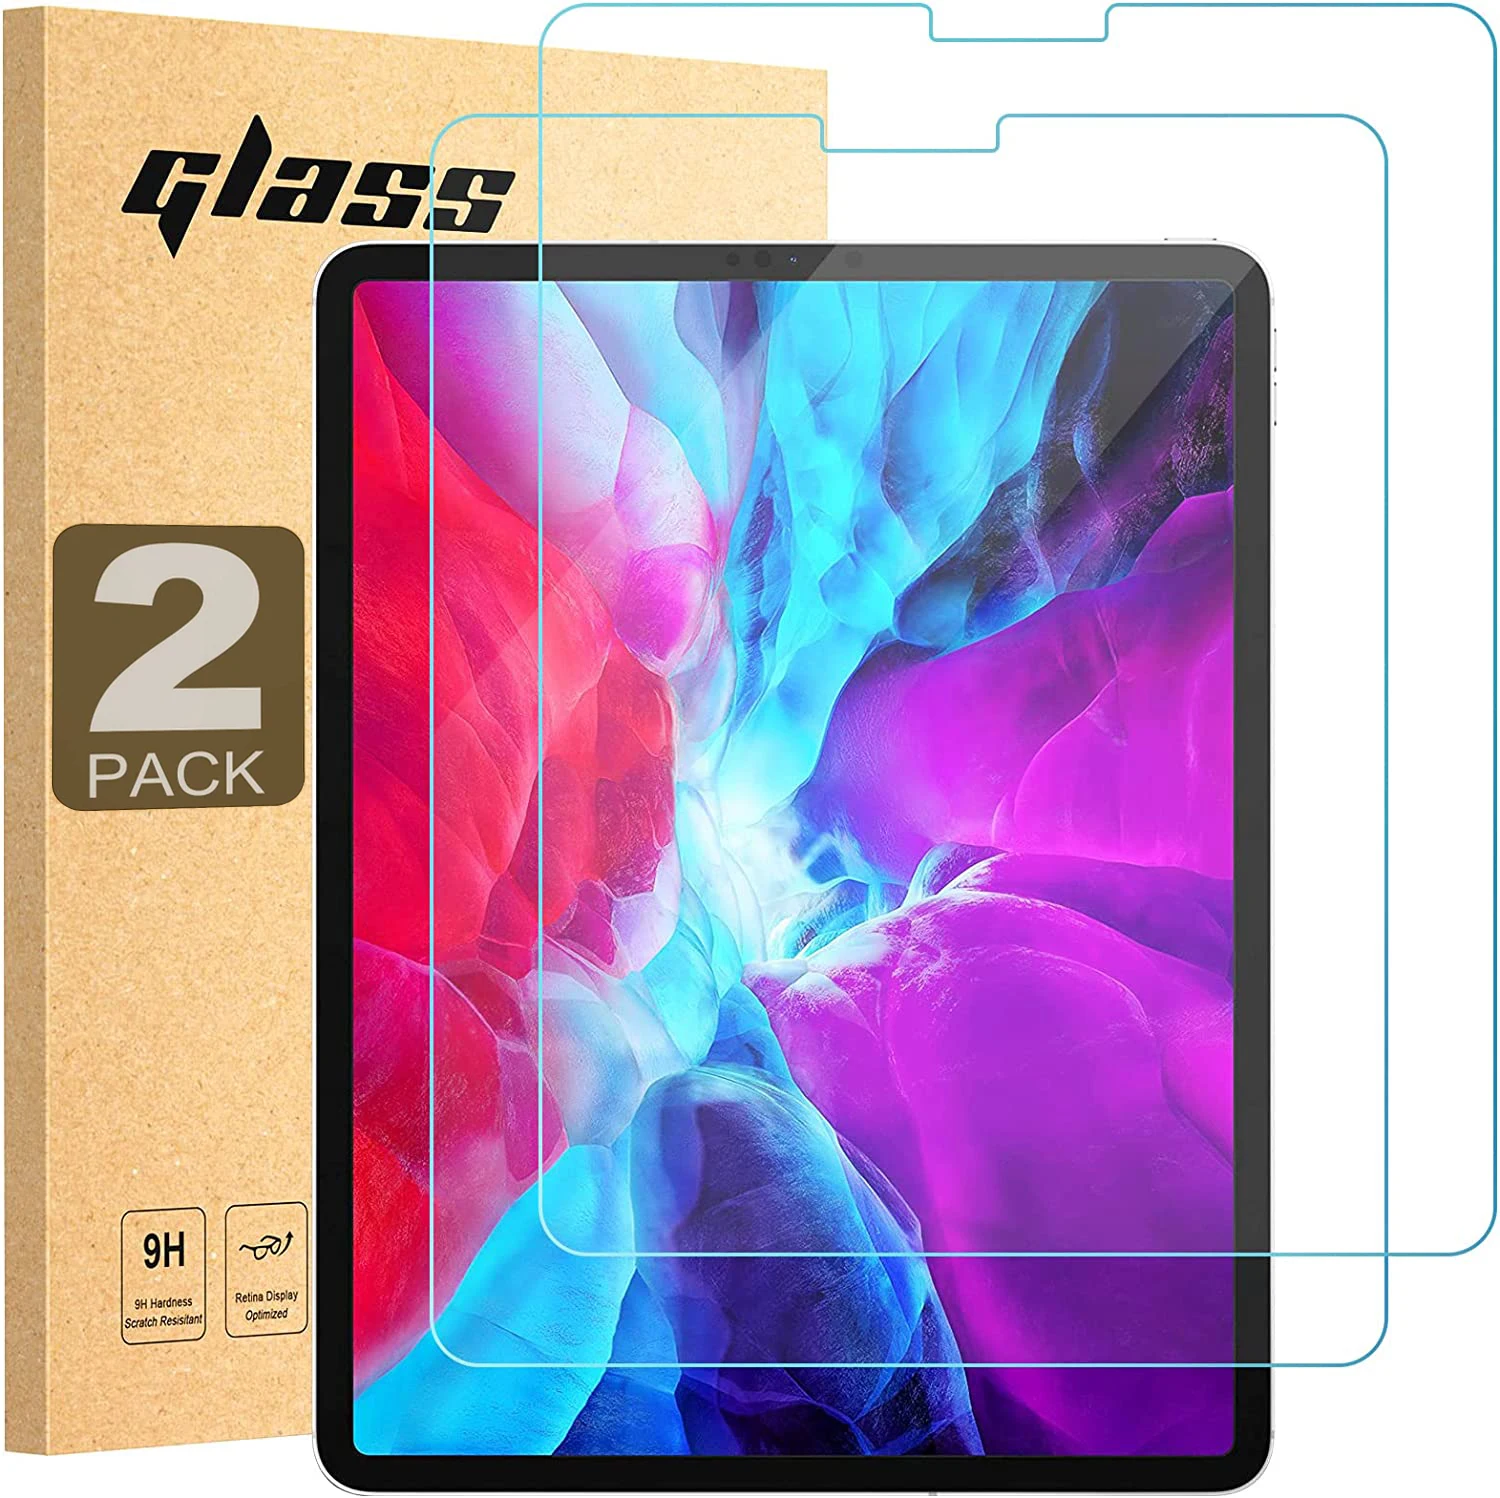 2pcs Screen Protector Tempered Glass For iPad Pro 12.9 2020 2018 2015 2017 2021 2022 A2232 A2437 A1670 Full Coverage Tablet Film 2pcs tablet tempered glass screen protector cover for apple ipad air 3 ipad pro 10 5 inch hd full coverage protective film